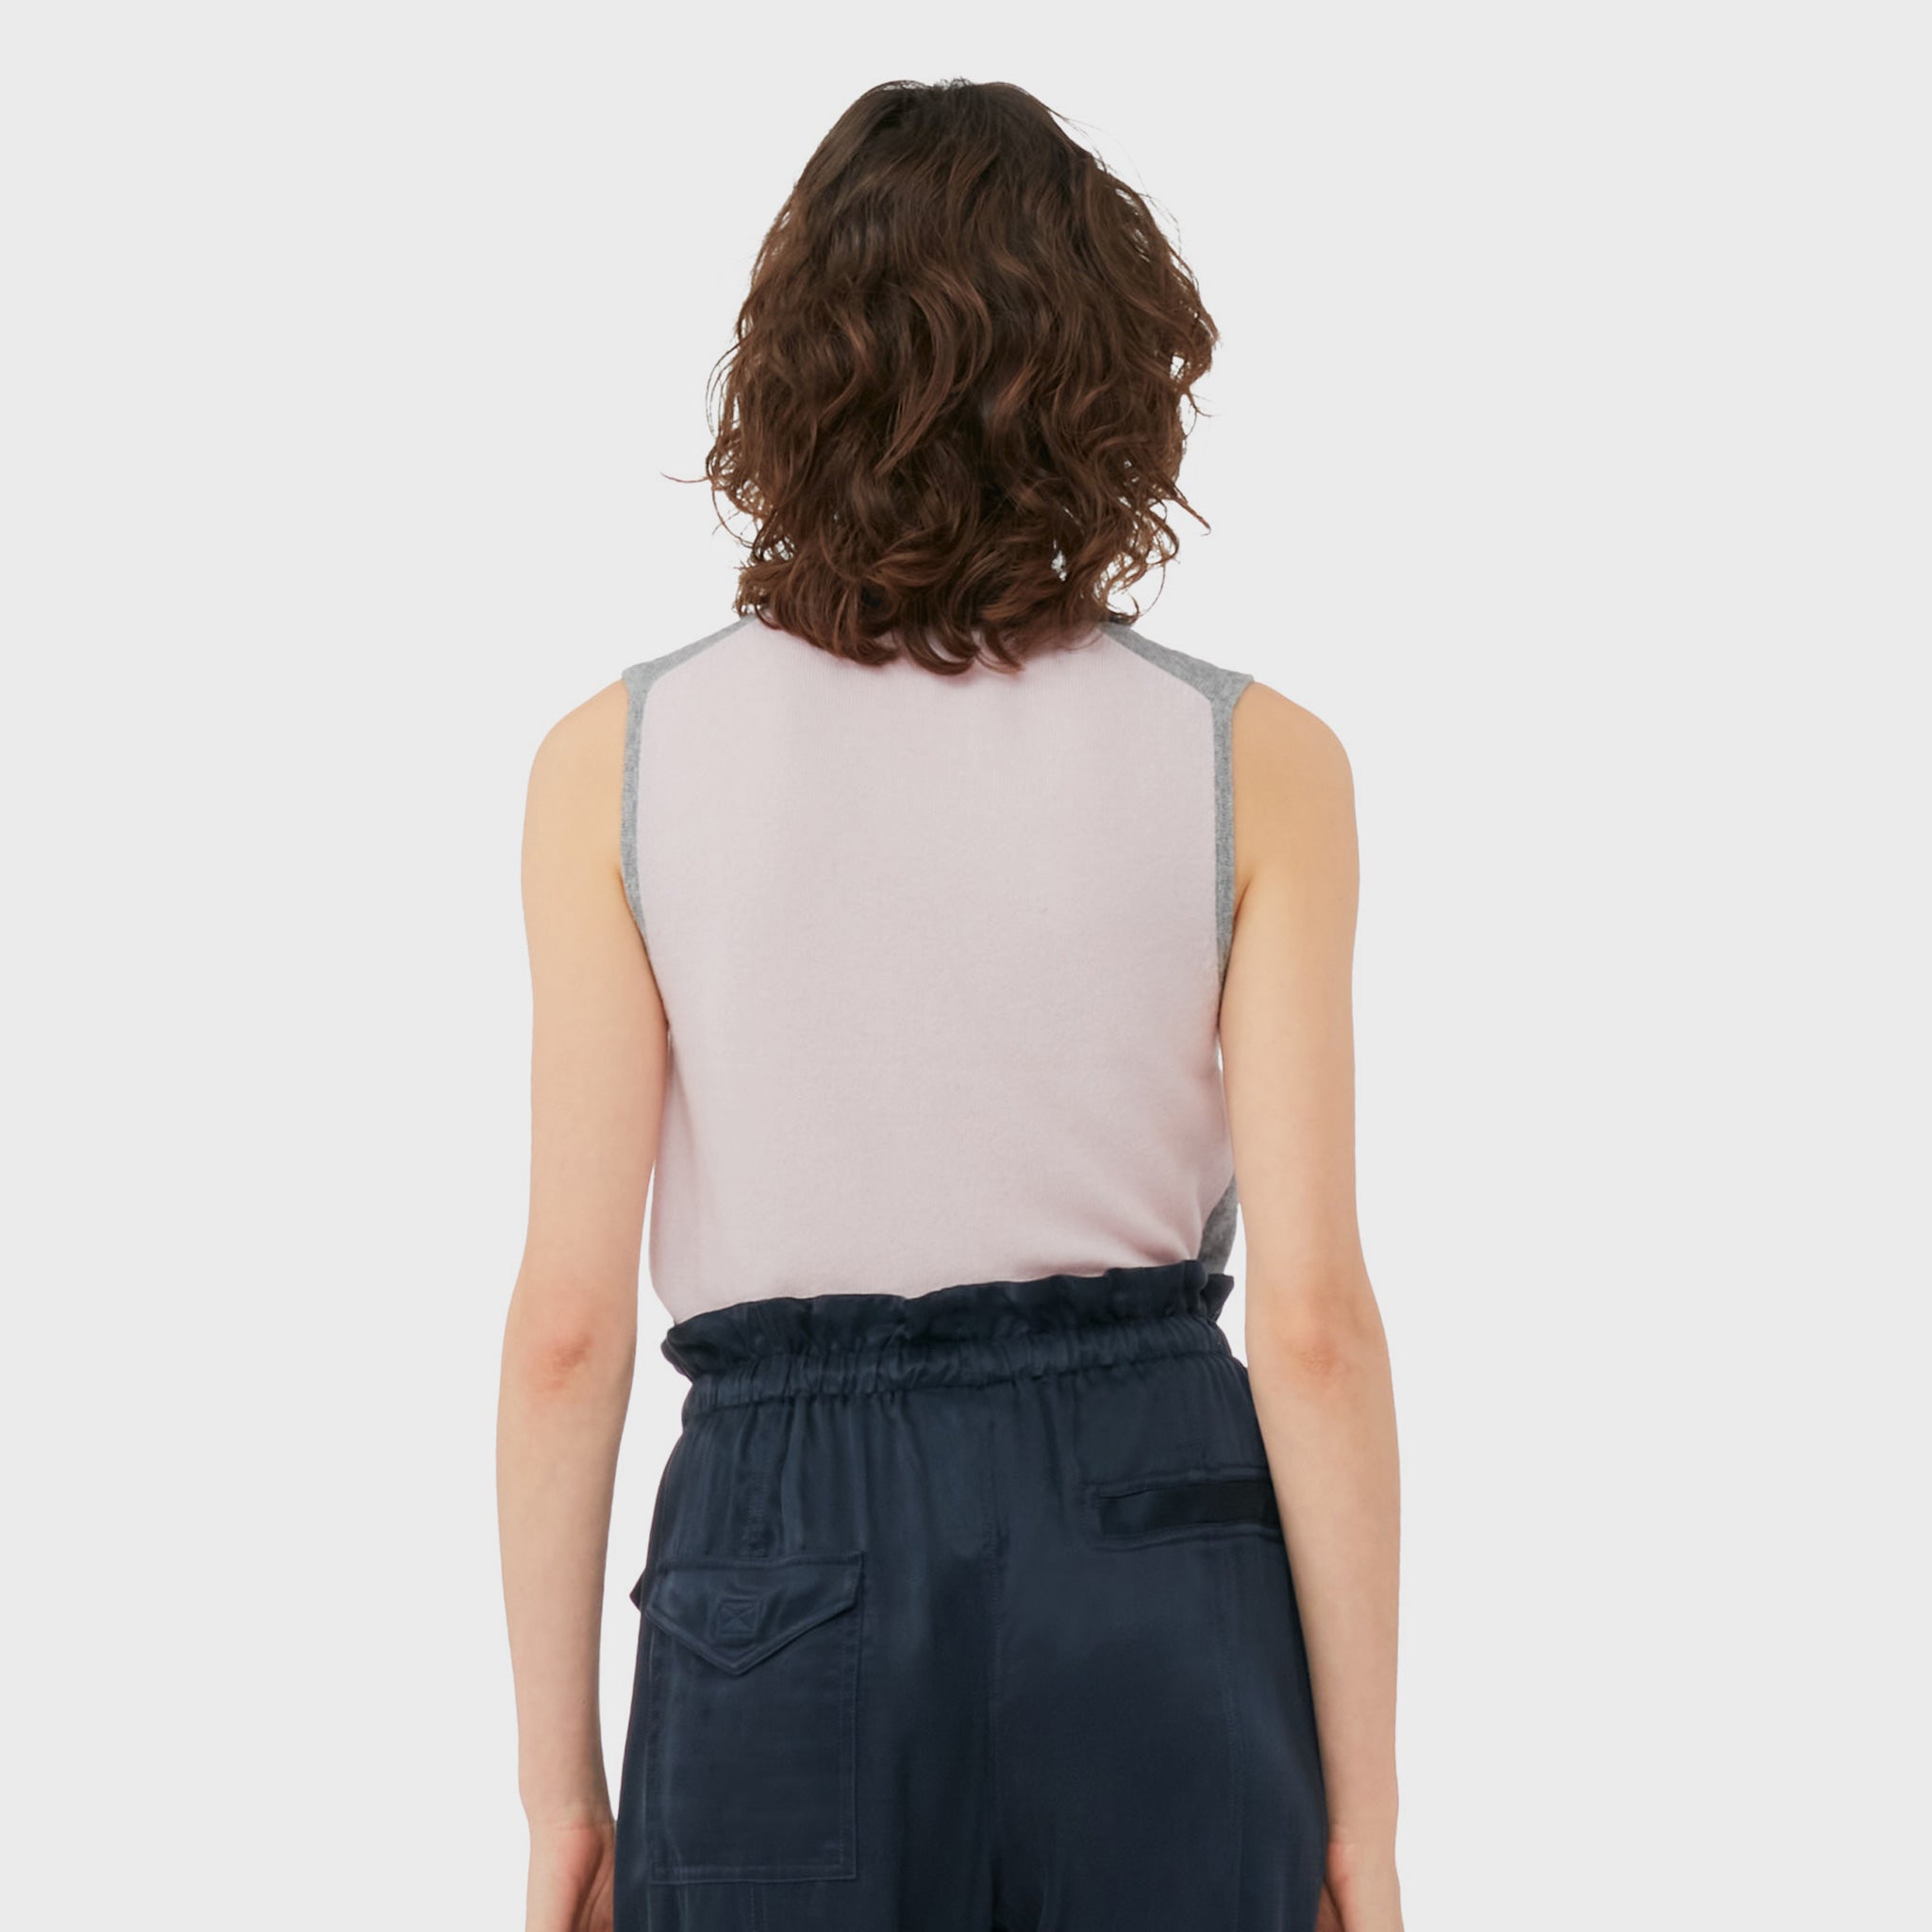 A model wears the frost gray sleeveless polo top with contrasting navy blue collar and gold button hardware, back view with semi-sheer white back.